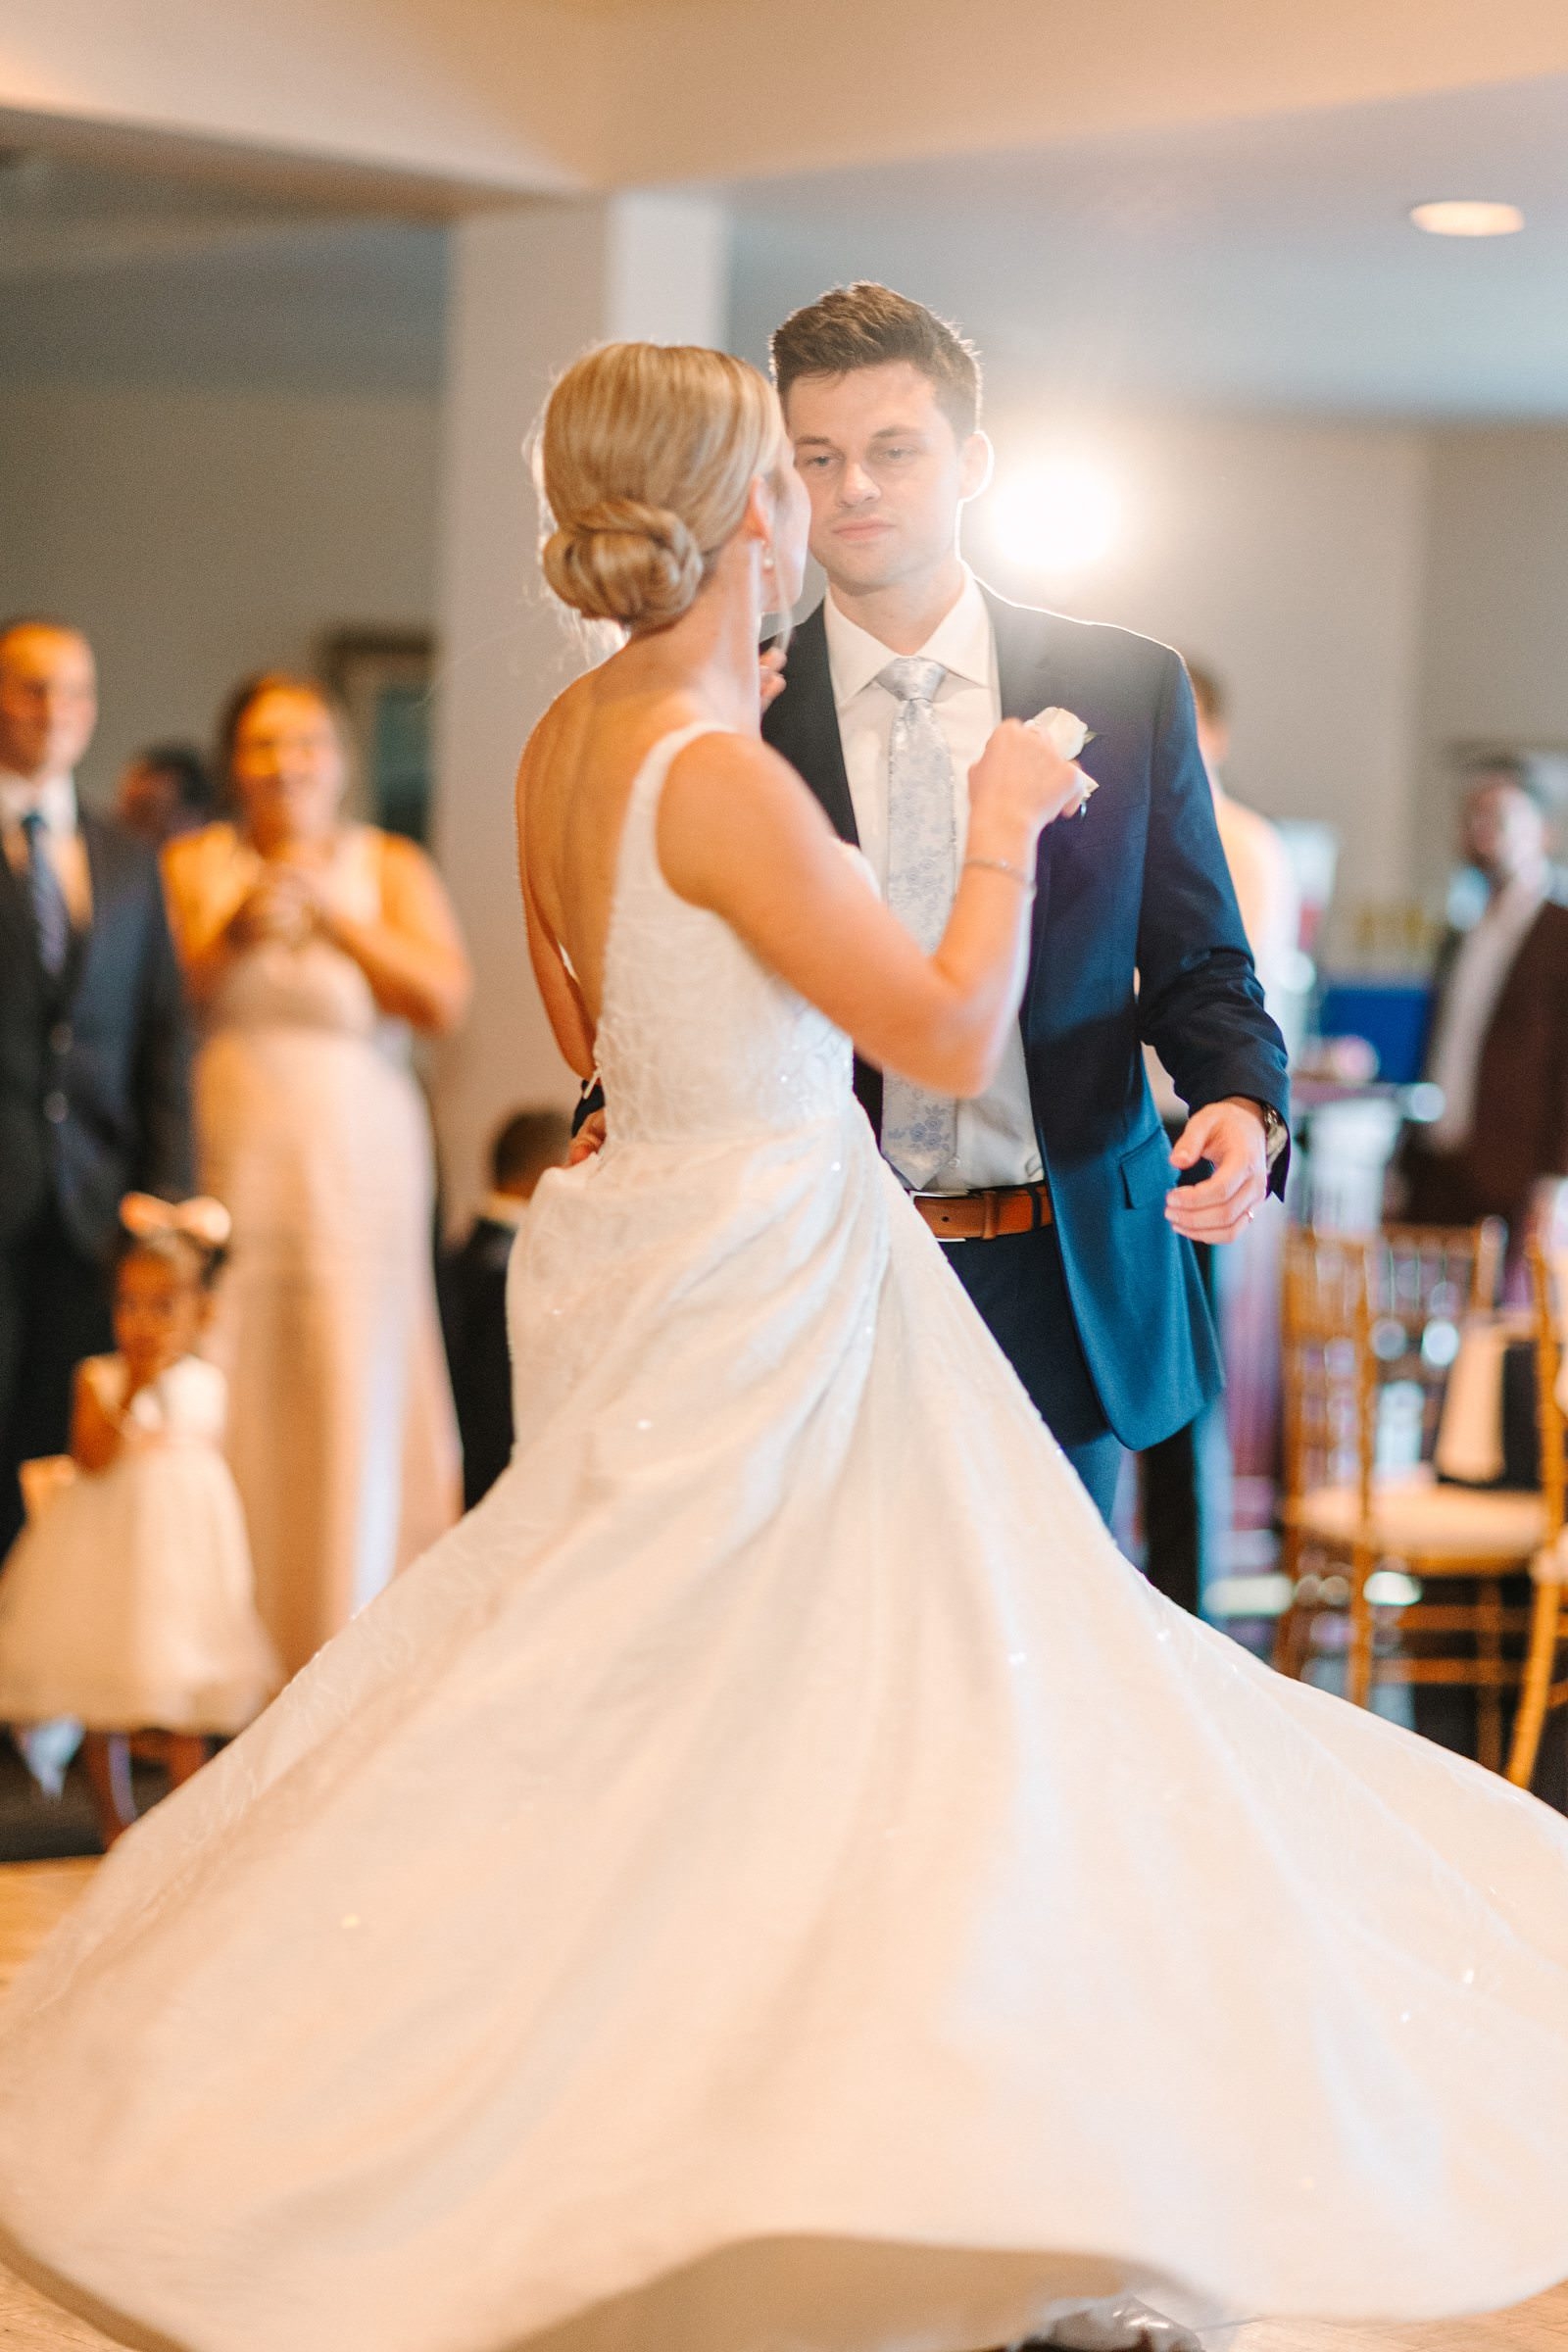 An Evansville Country Club Wedding | Ashley and Beau | Bret and Brandie Photography210.jpg